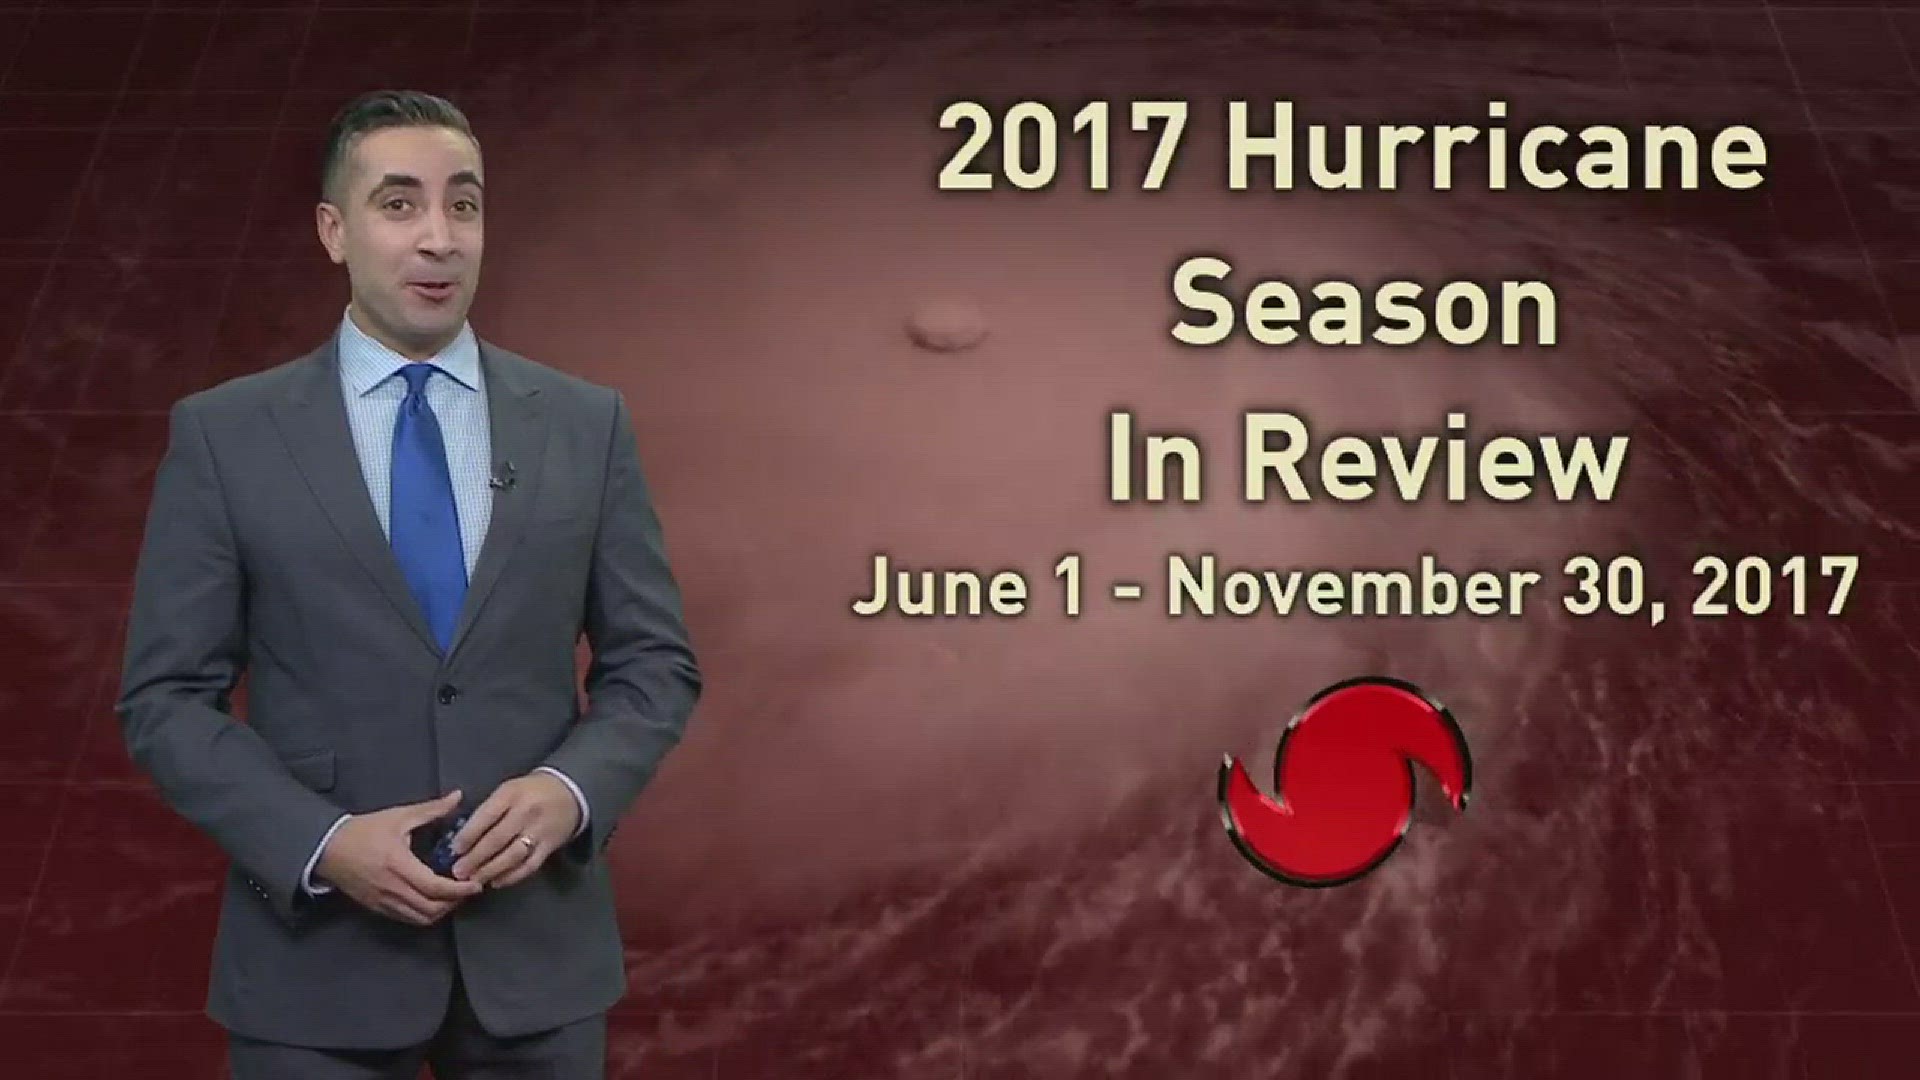 13News Now meteorologist Tim Pandajis takes a look back at an active and deadly hurricane season, which officially comes to an end on November 30.